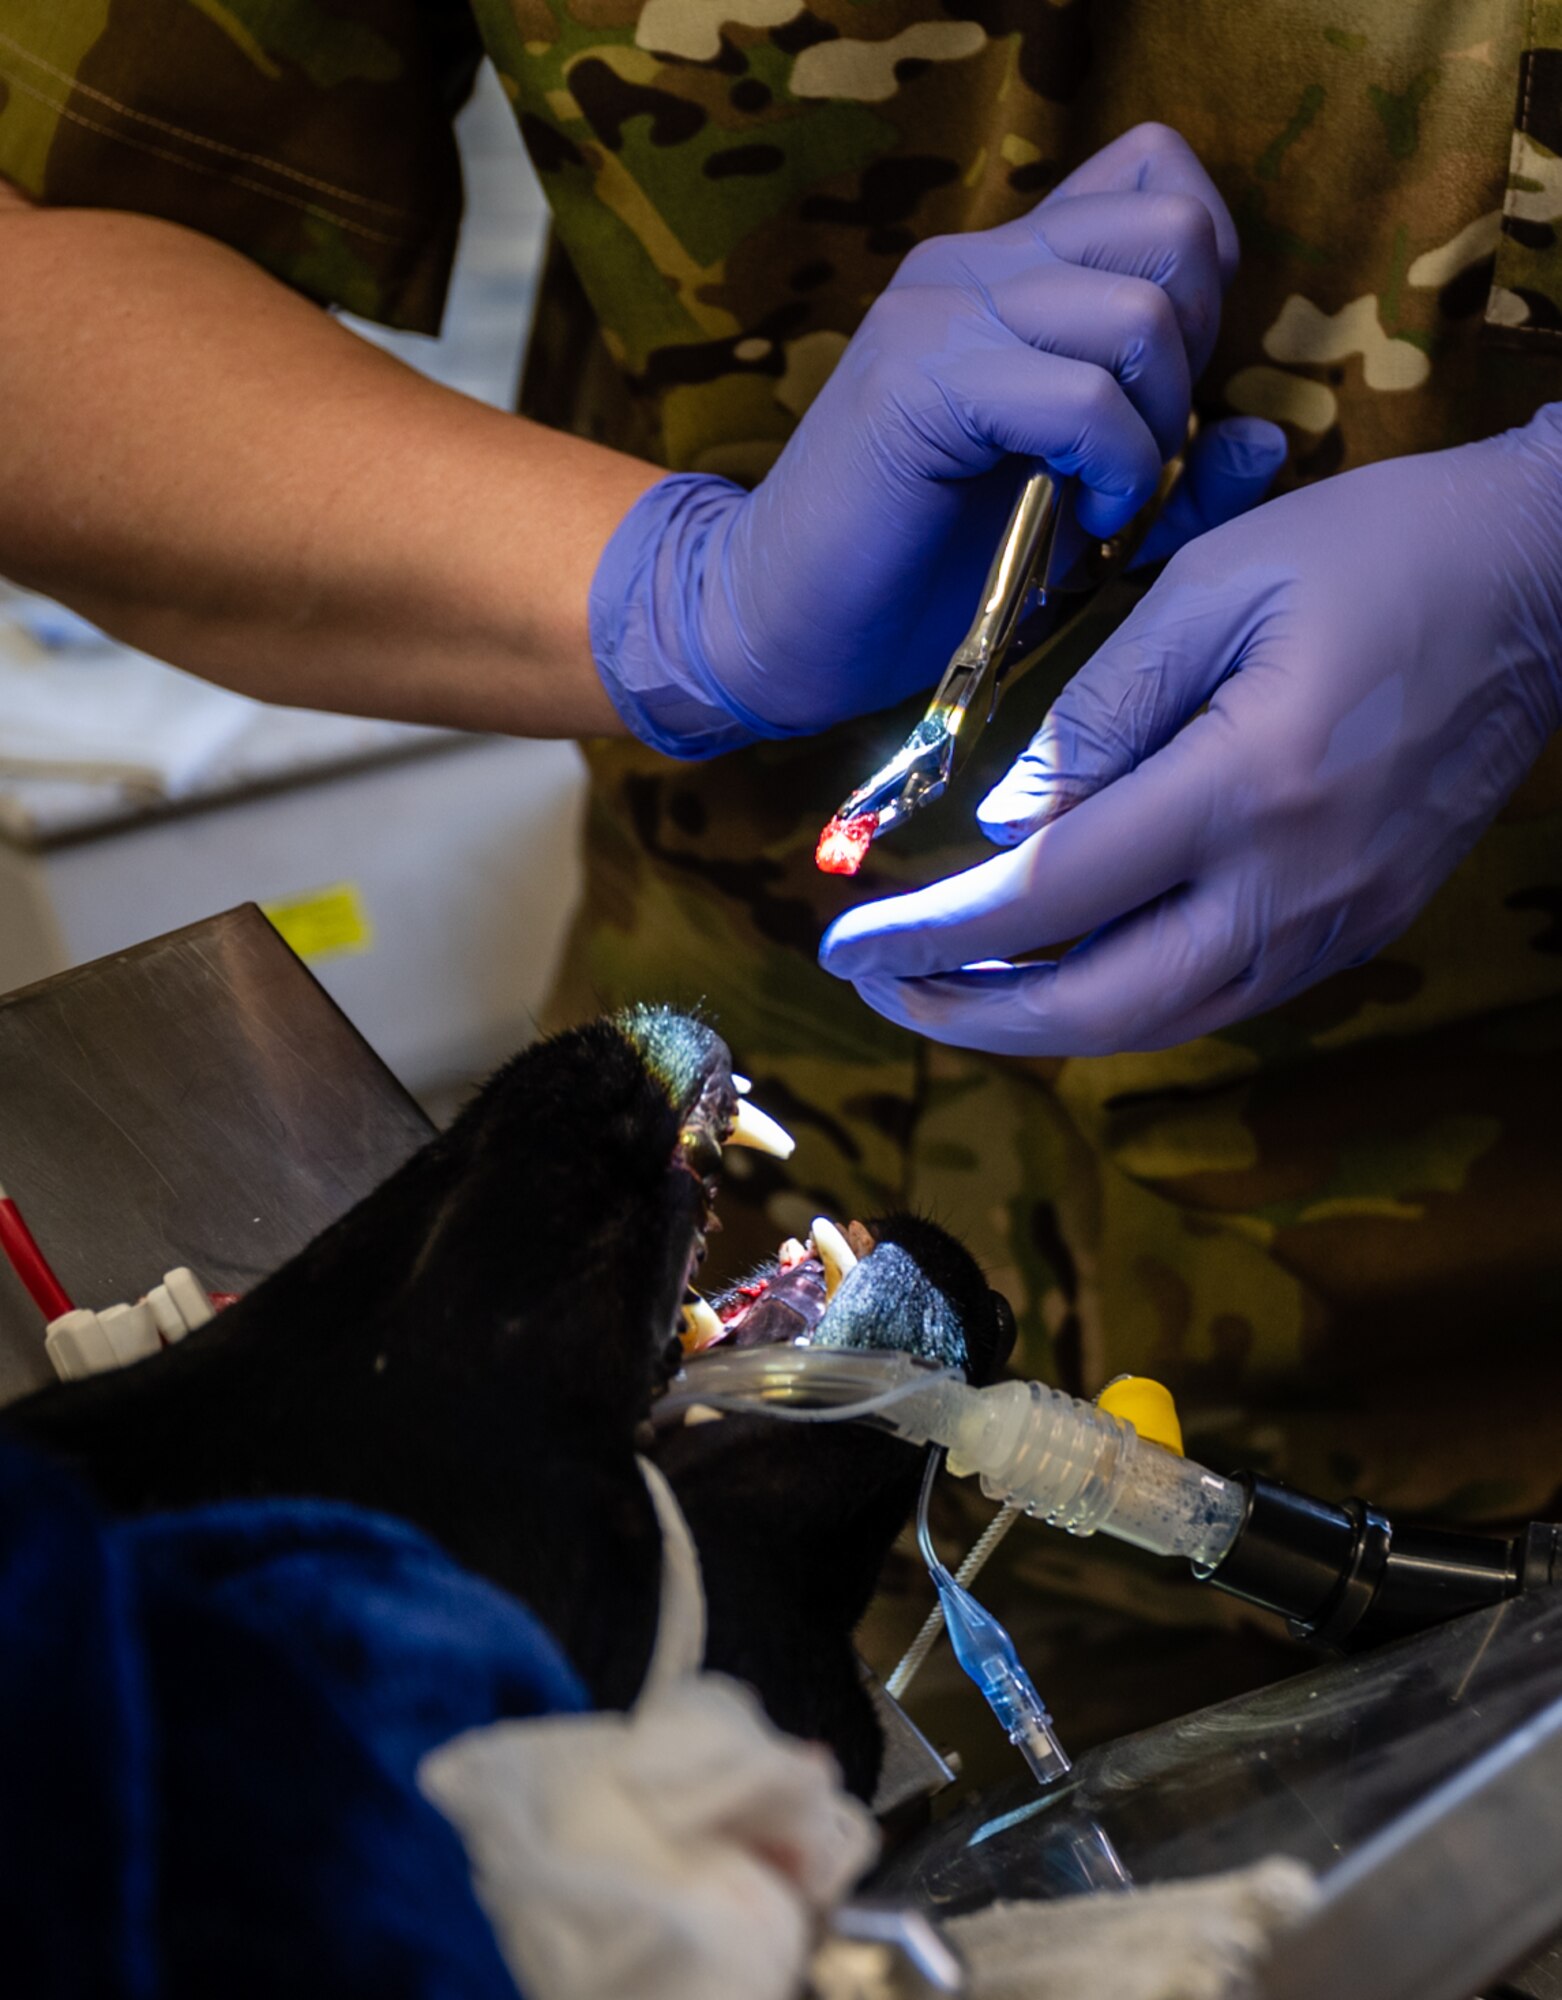 Maj. Christina Pflipsen, 332d Expeditionary Medical Group medical operations commander and chief of dental services, extracts an incisor from military working dog BBasso at an undisclosed location in Southwest Asia, March 10. 248th Medical Detachment Veterinary Service Support, 3rd Medical Command, and 332d EMDG Dental Services personnel partnered to provide dental care in support of the 332d Expeditionary Security Forces Squadron military working dog mission. (U.S. Air Force photo by Master Sgt. Christopher Parr)